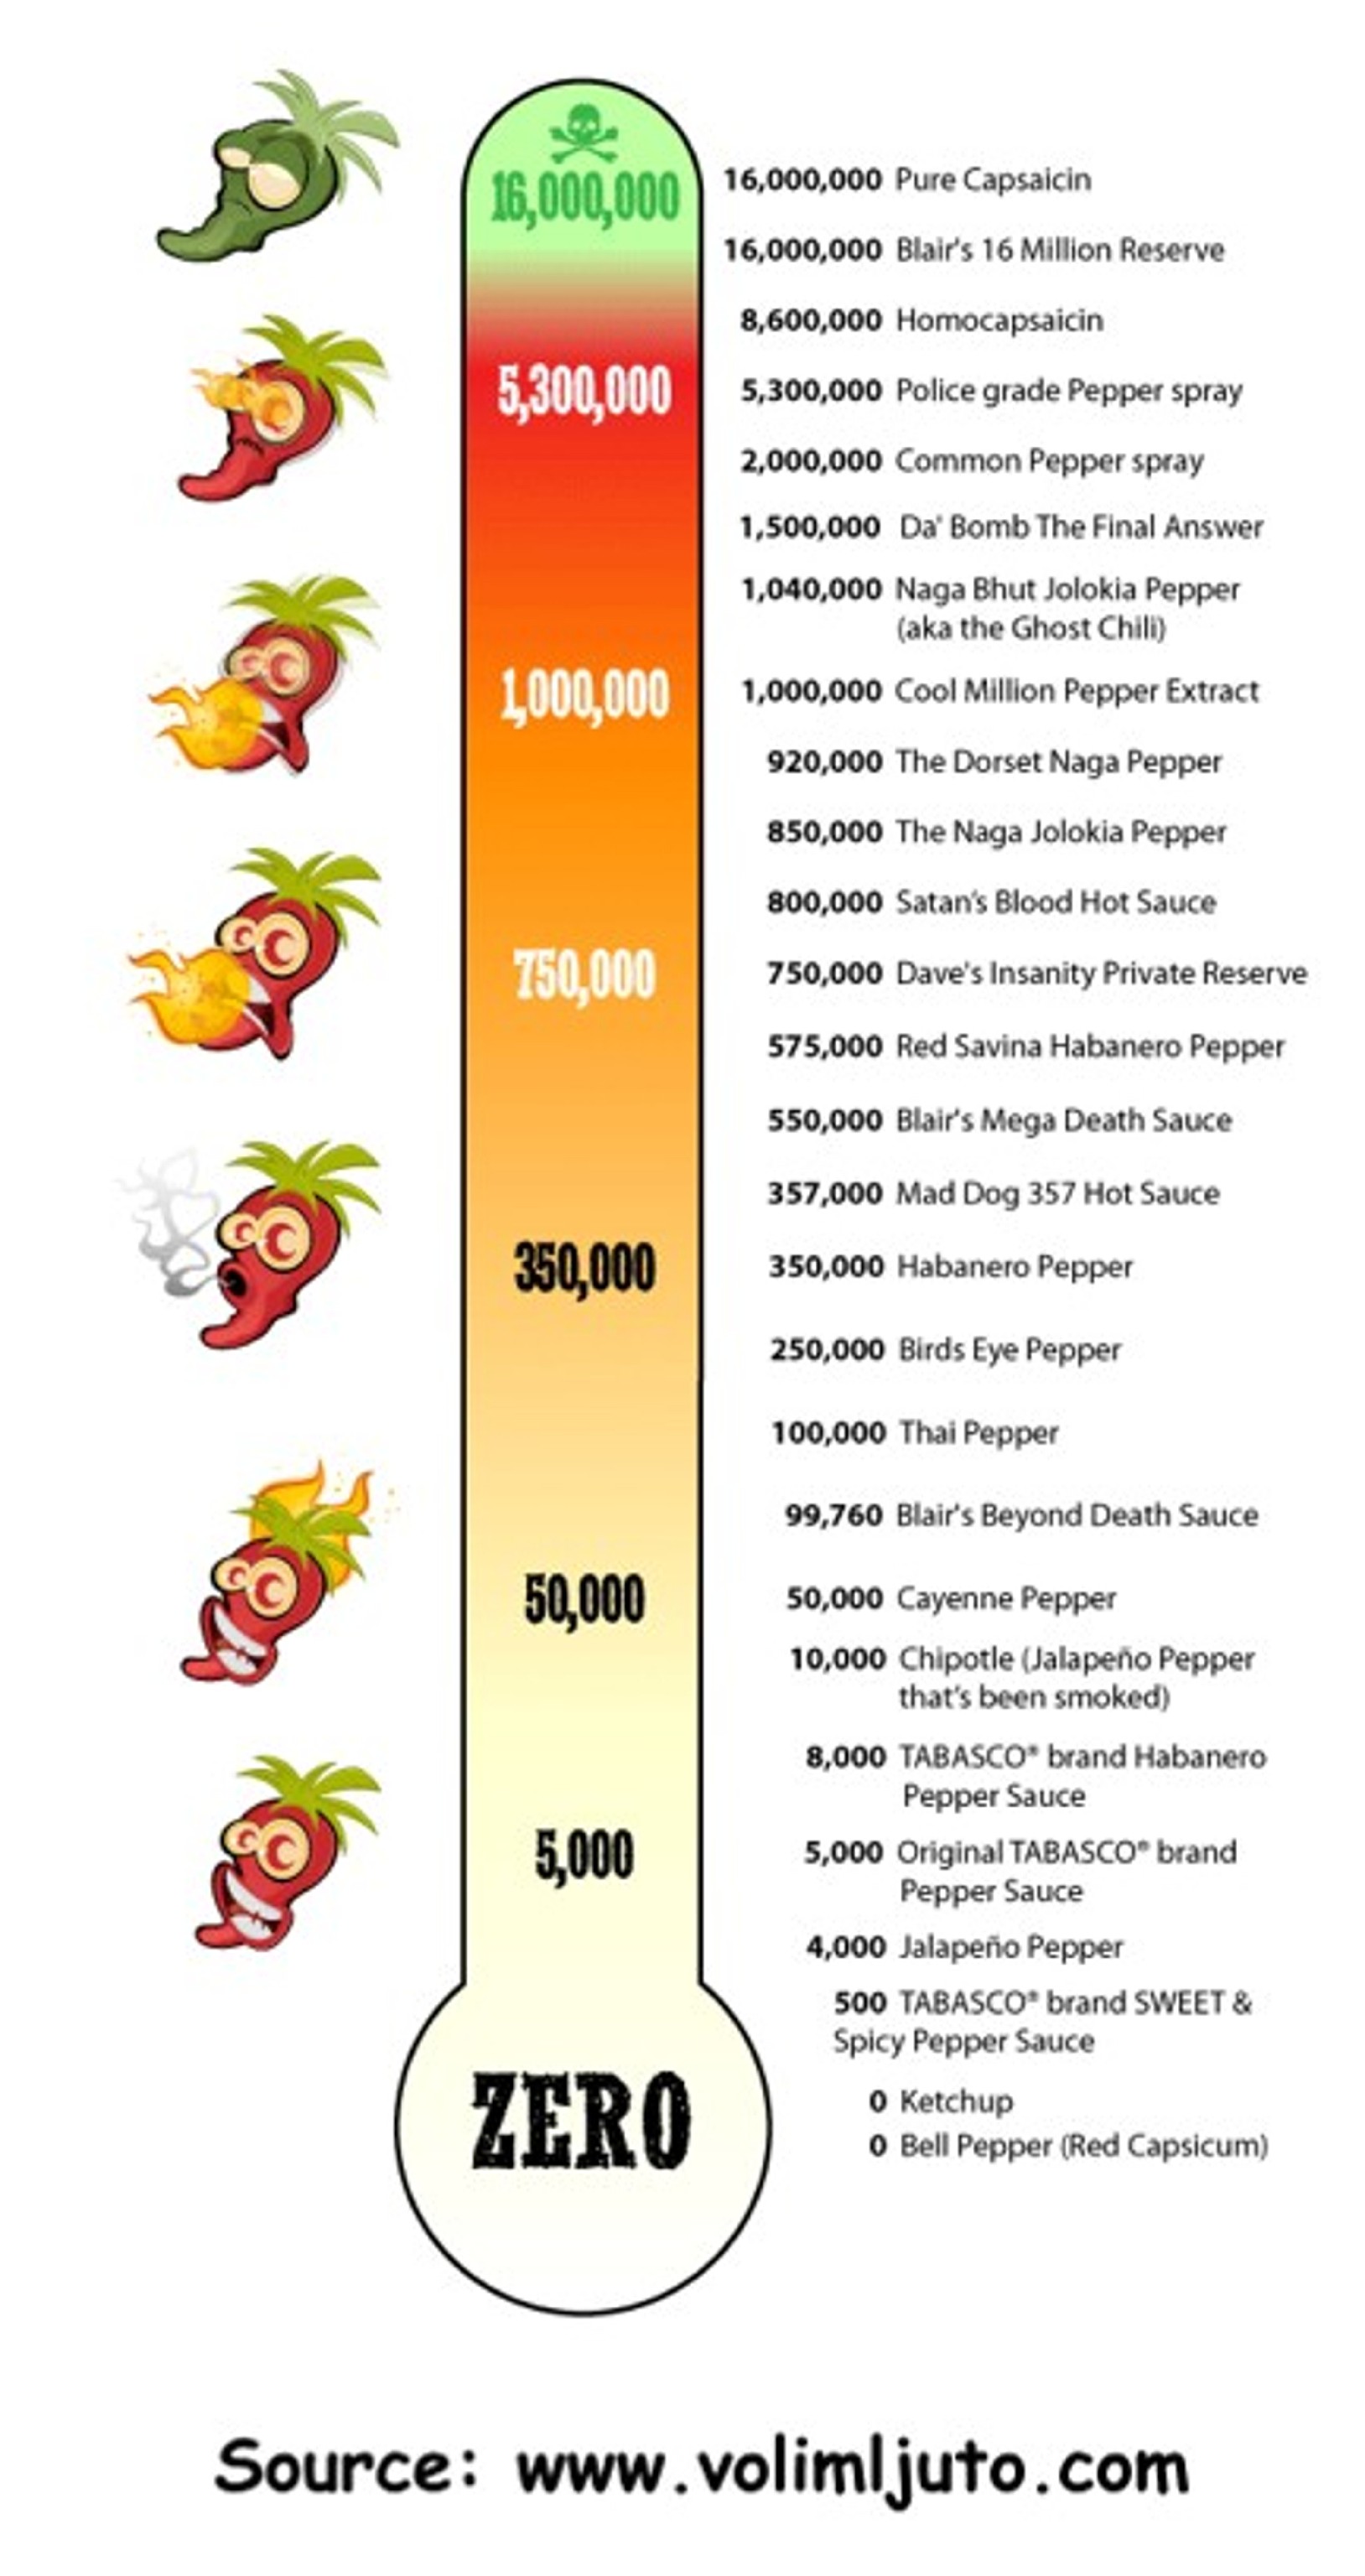 What are some of the hottest peppers?